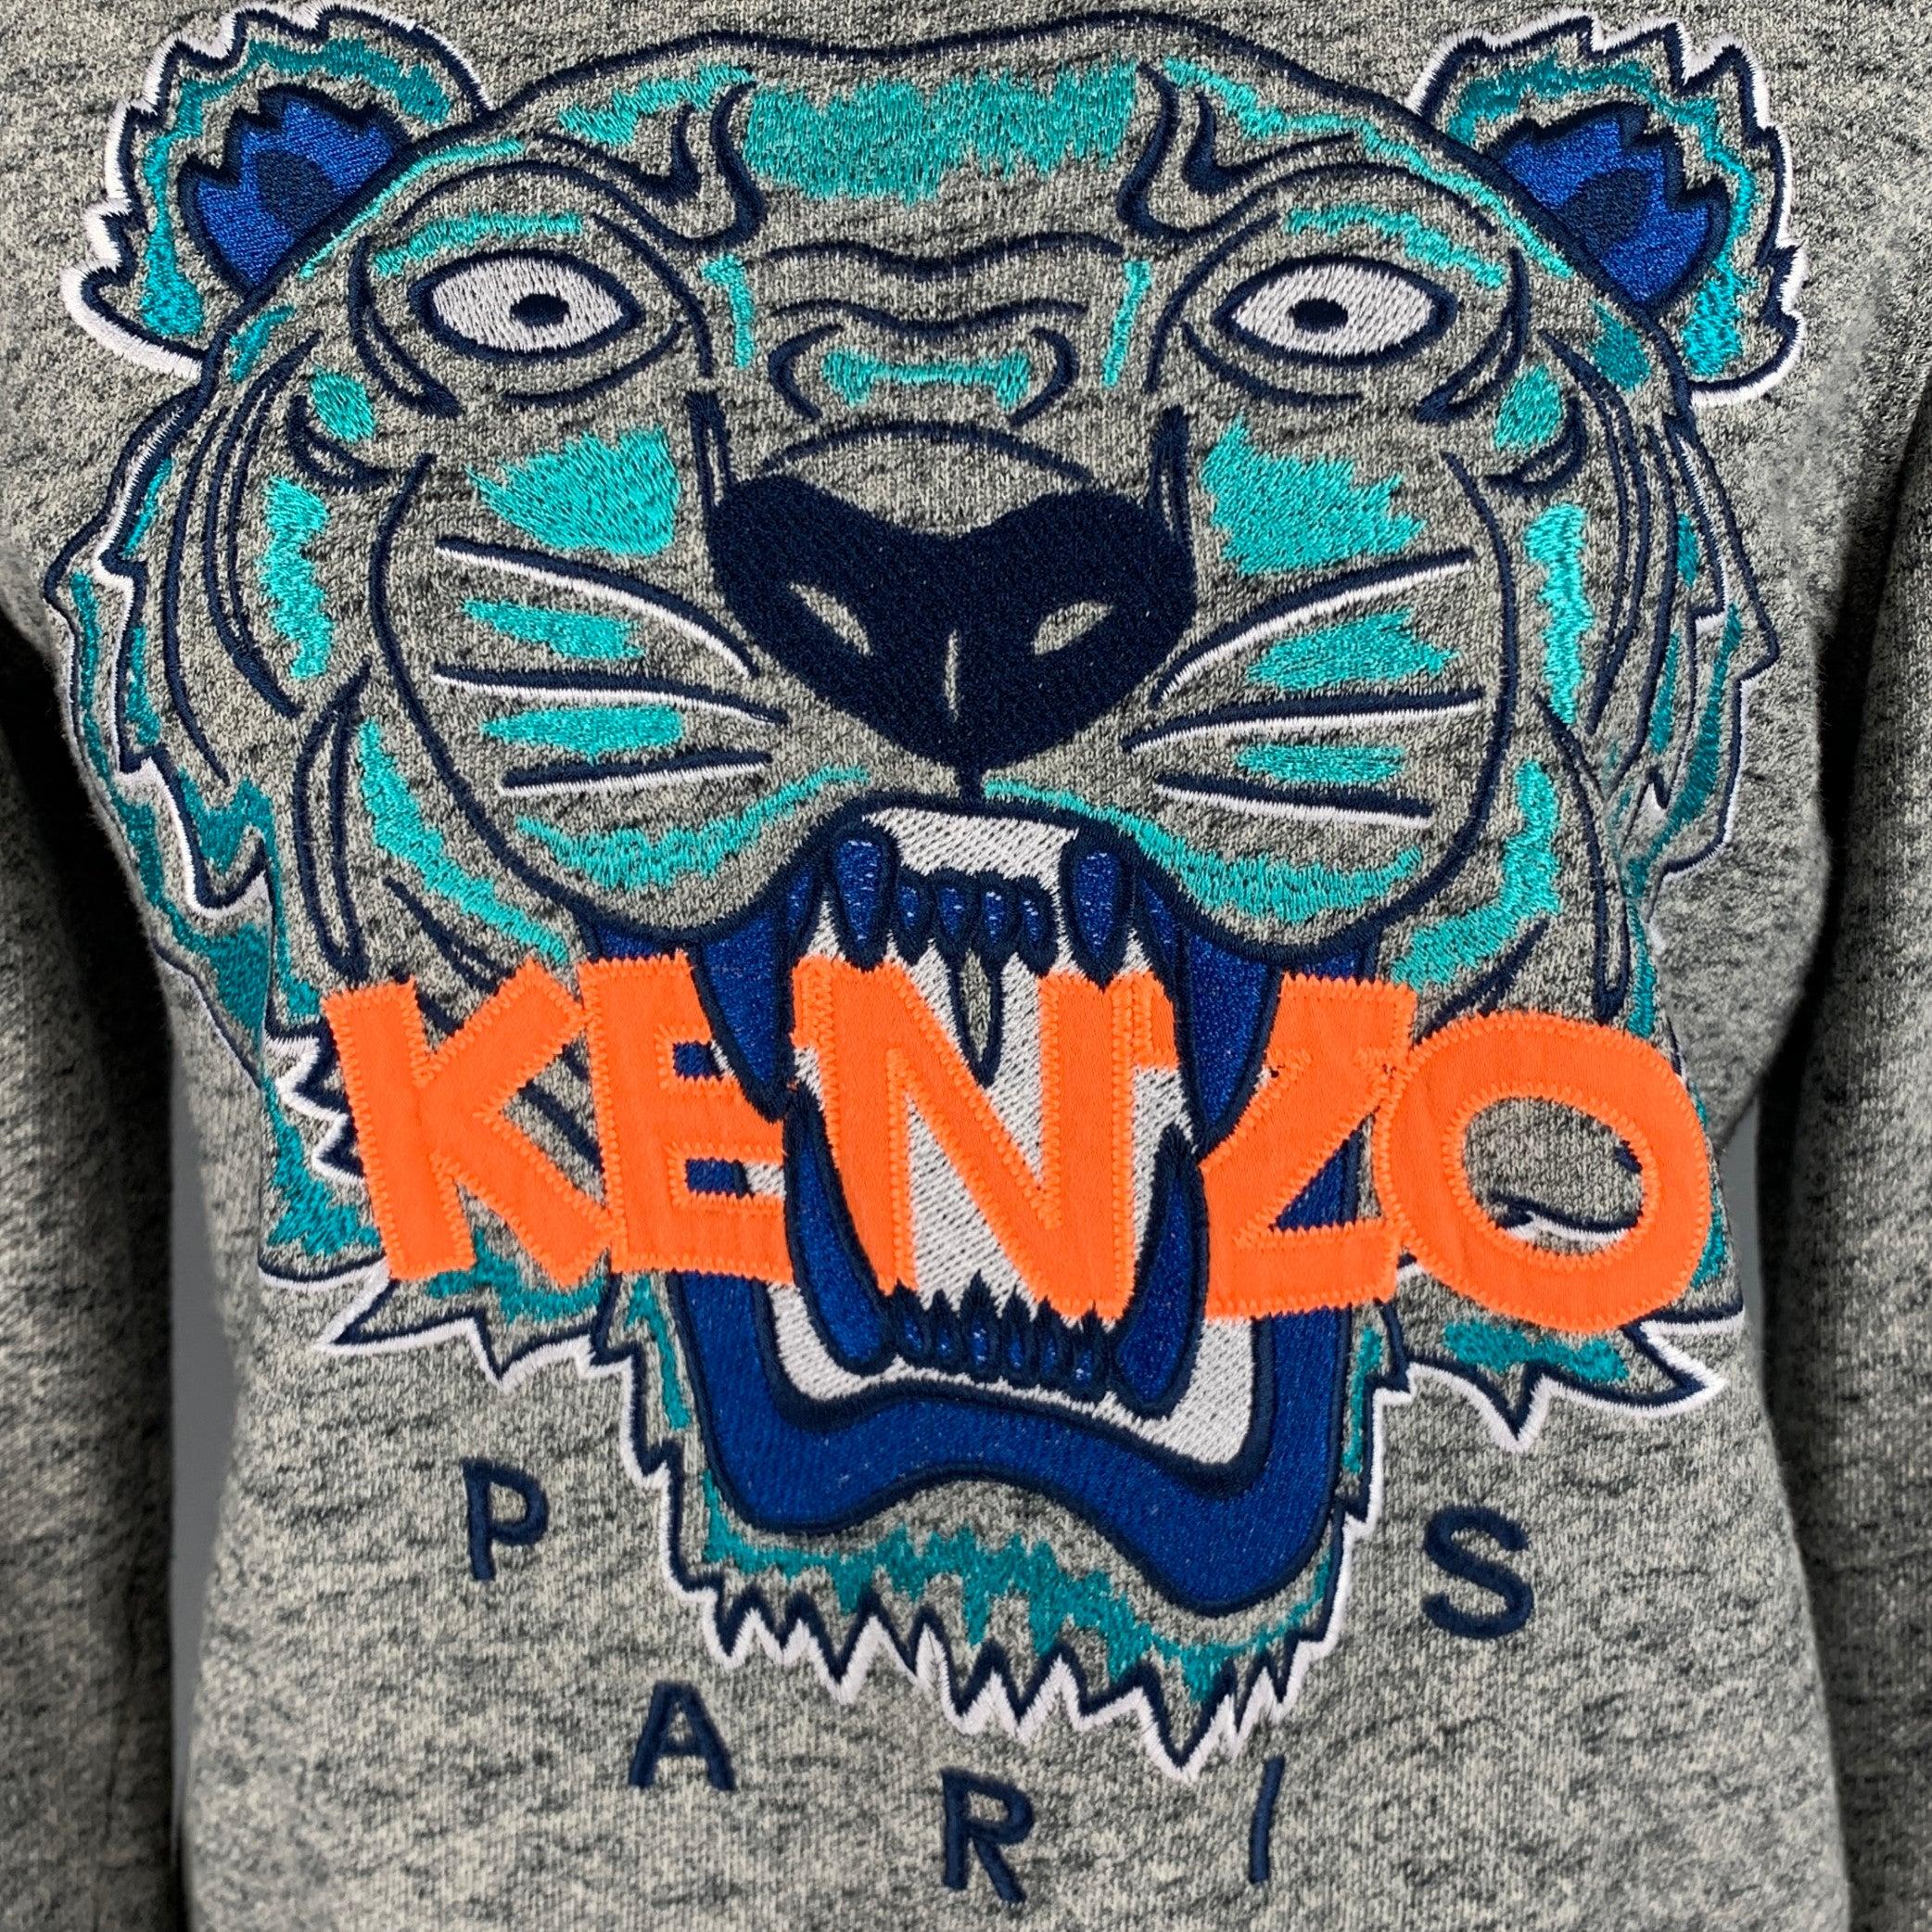 KENZO sweatshirt
in a grey cotton fabric featuring embroidered orange logo with blue tiger, and crew neck.Excellent Pre-Owned Condition. 

Marked:   S 

Measurements: 
 
Shoulder: 15.5 inches Bust: 36 inches Sleeve: 22.5 inches Length: 20 inches 
 